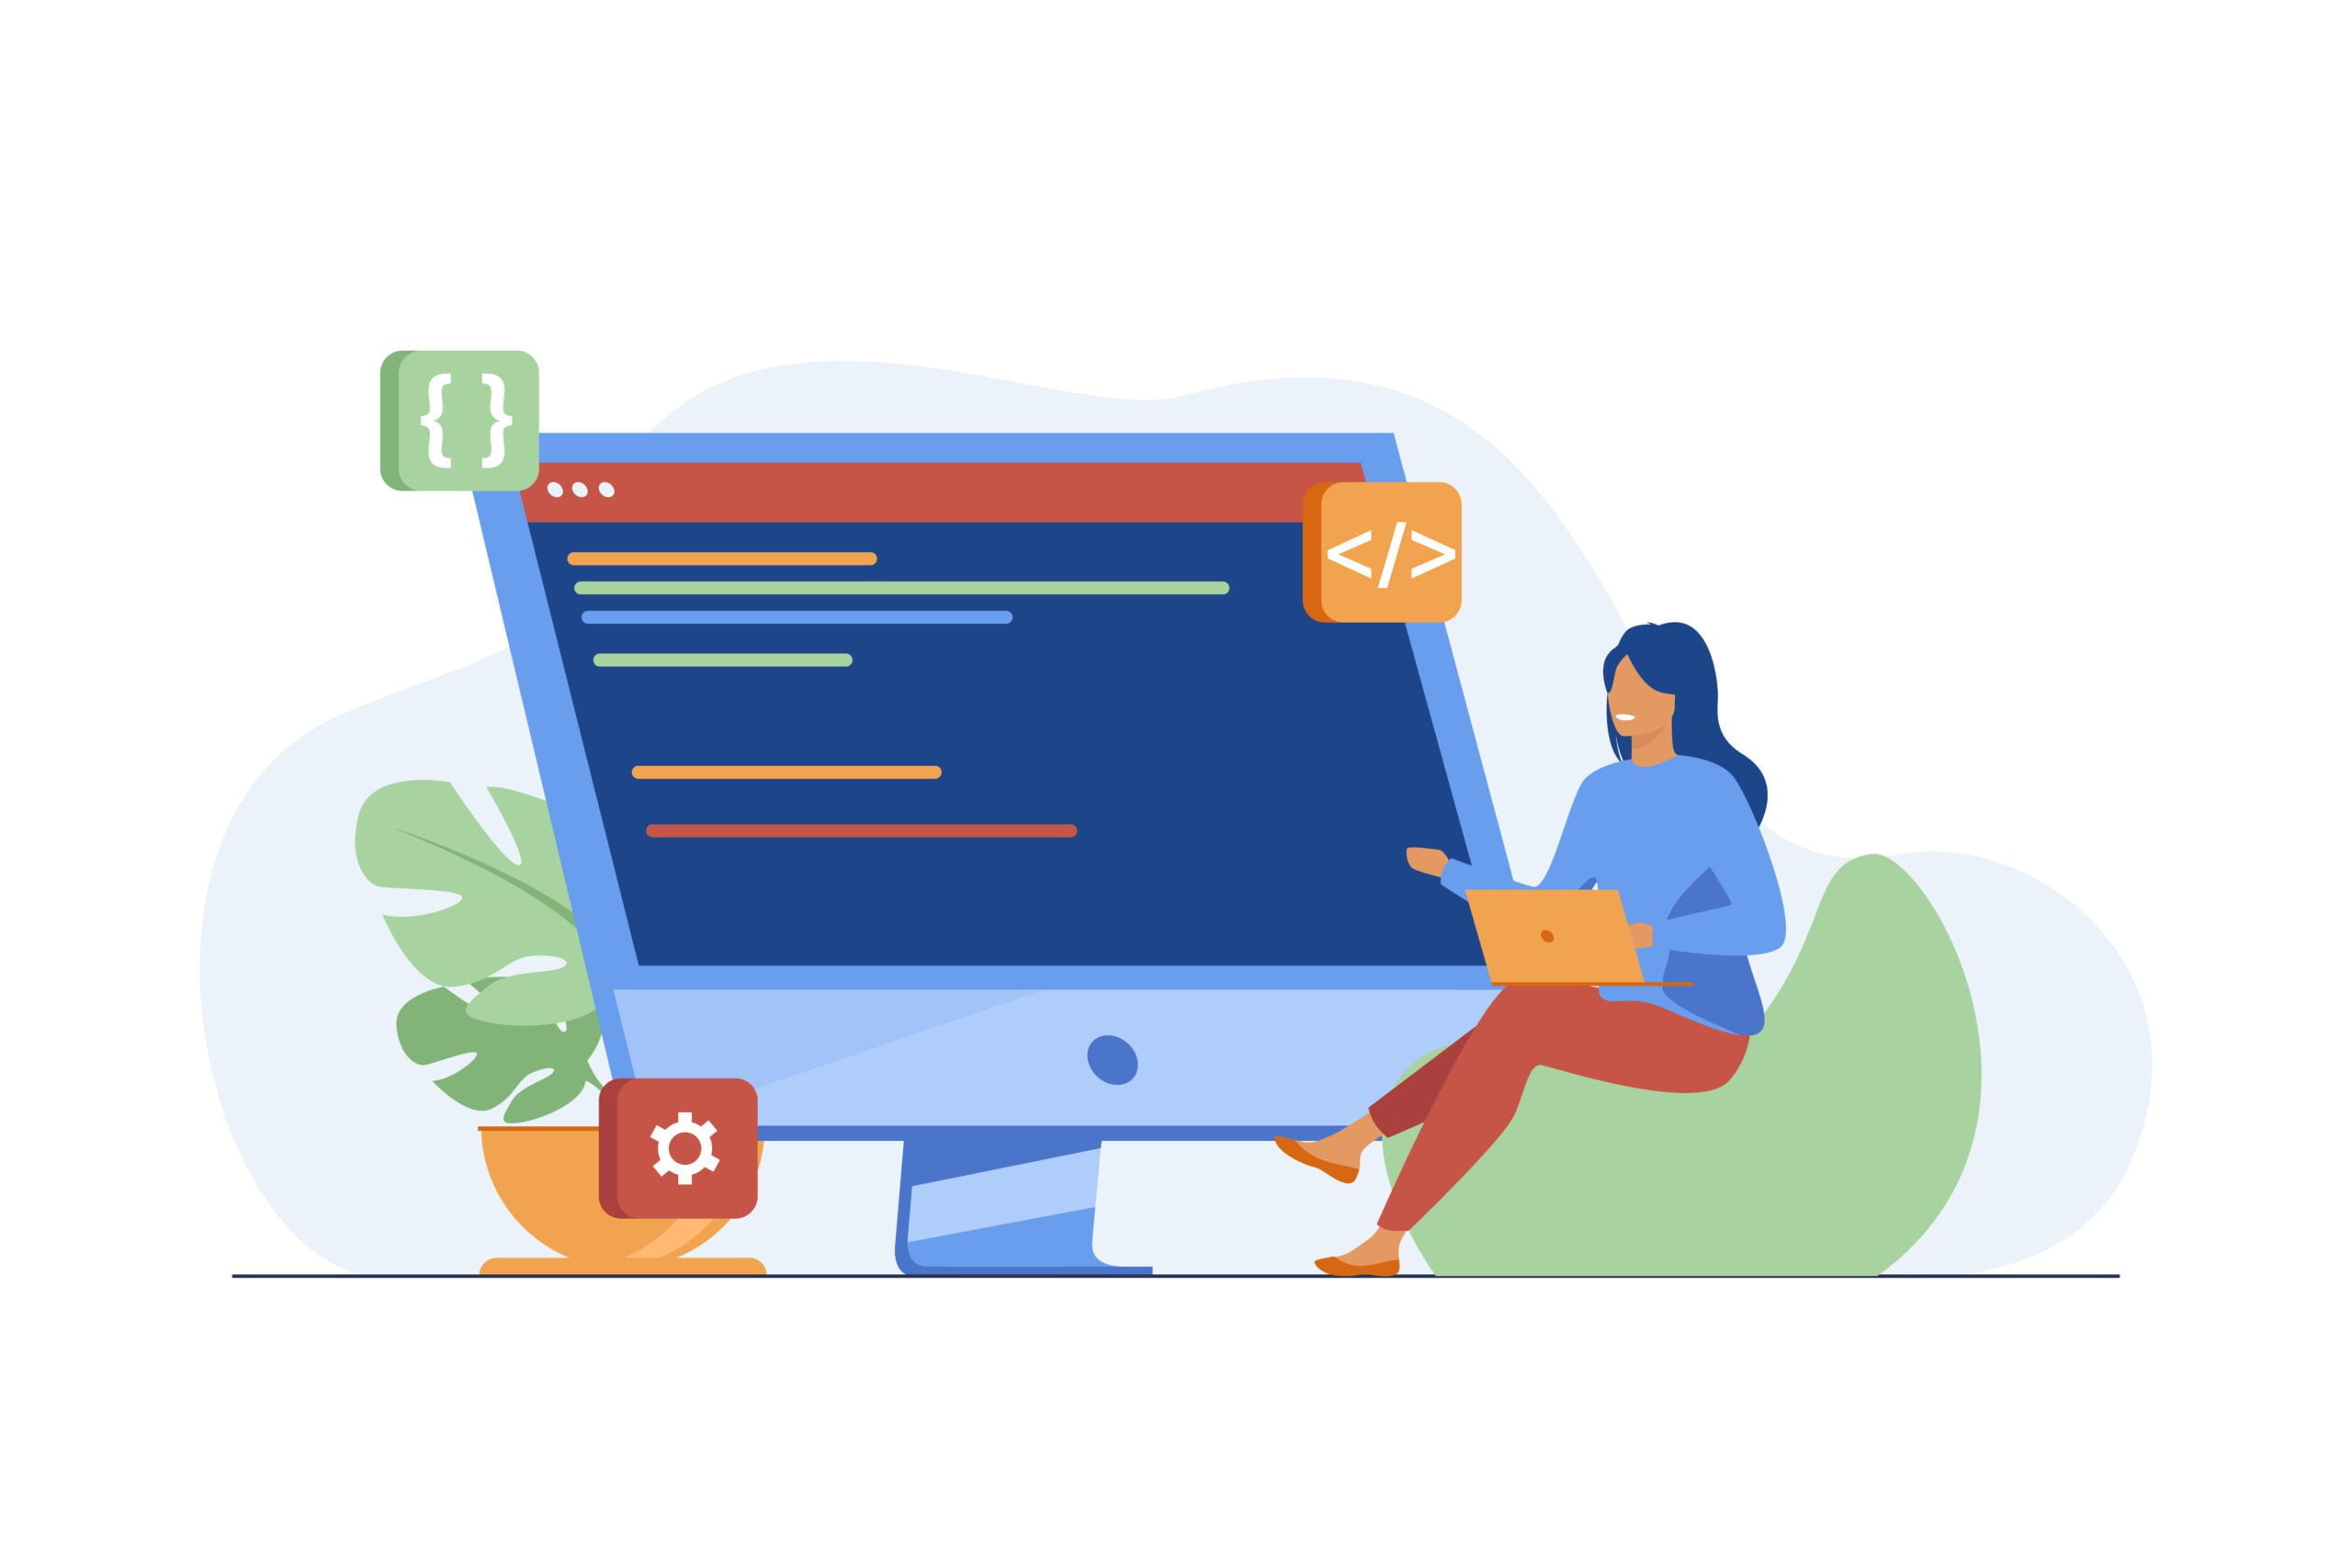 Young tiny girl sitting and coding via laptop. Computer, programmer, code flat vector illustration. IT and digital technology concept for banner, website design or landing web page